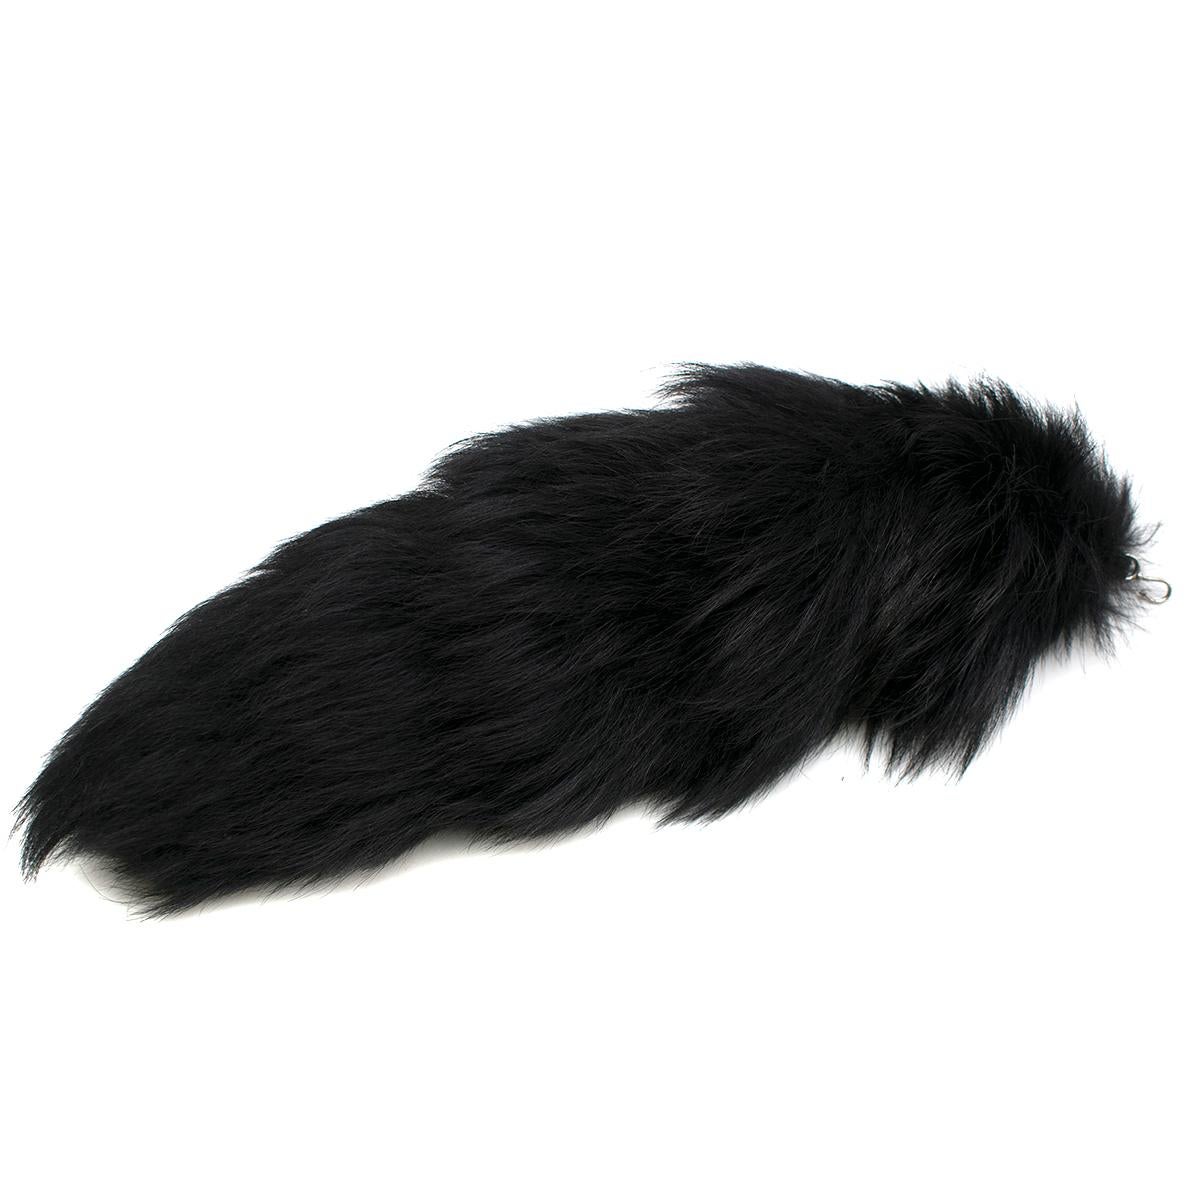 Alexander McQueen White Fox Fur Tail Charm

- 100% Dyed Fox Fur Charm
- Natural size from Finland 
- Silver toned hook attachment 
- Can be hung on necklaces, trousers, bags, keychains etc 

Please note, these items are pre-owned and may show some